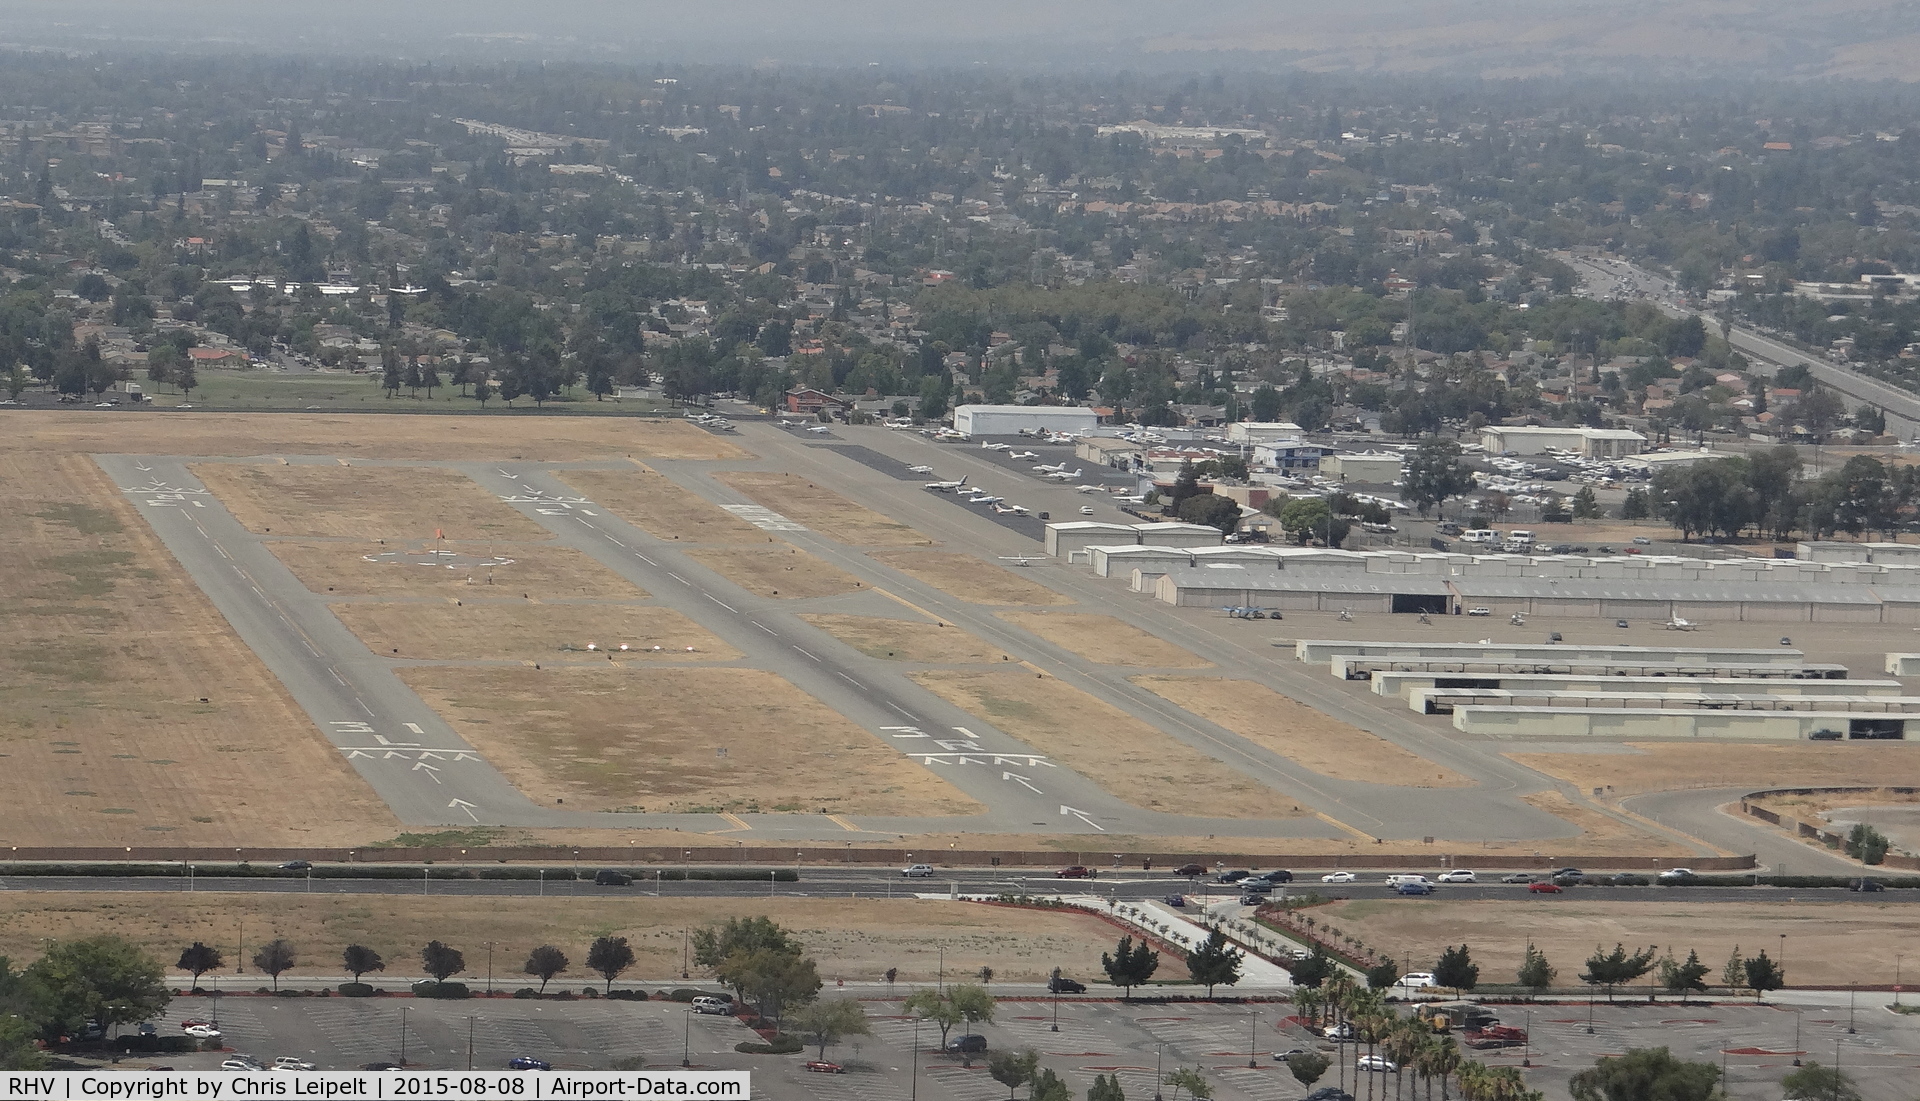 Reid-hillview Of Santa Clara County Airport (RHV) - On final approach into Reid Hillview Airport, CA for 31L.